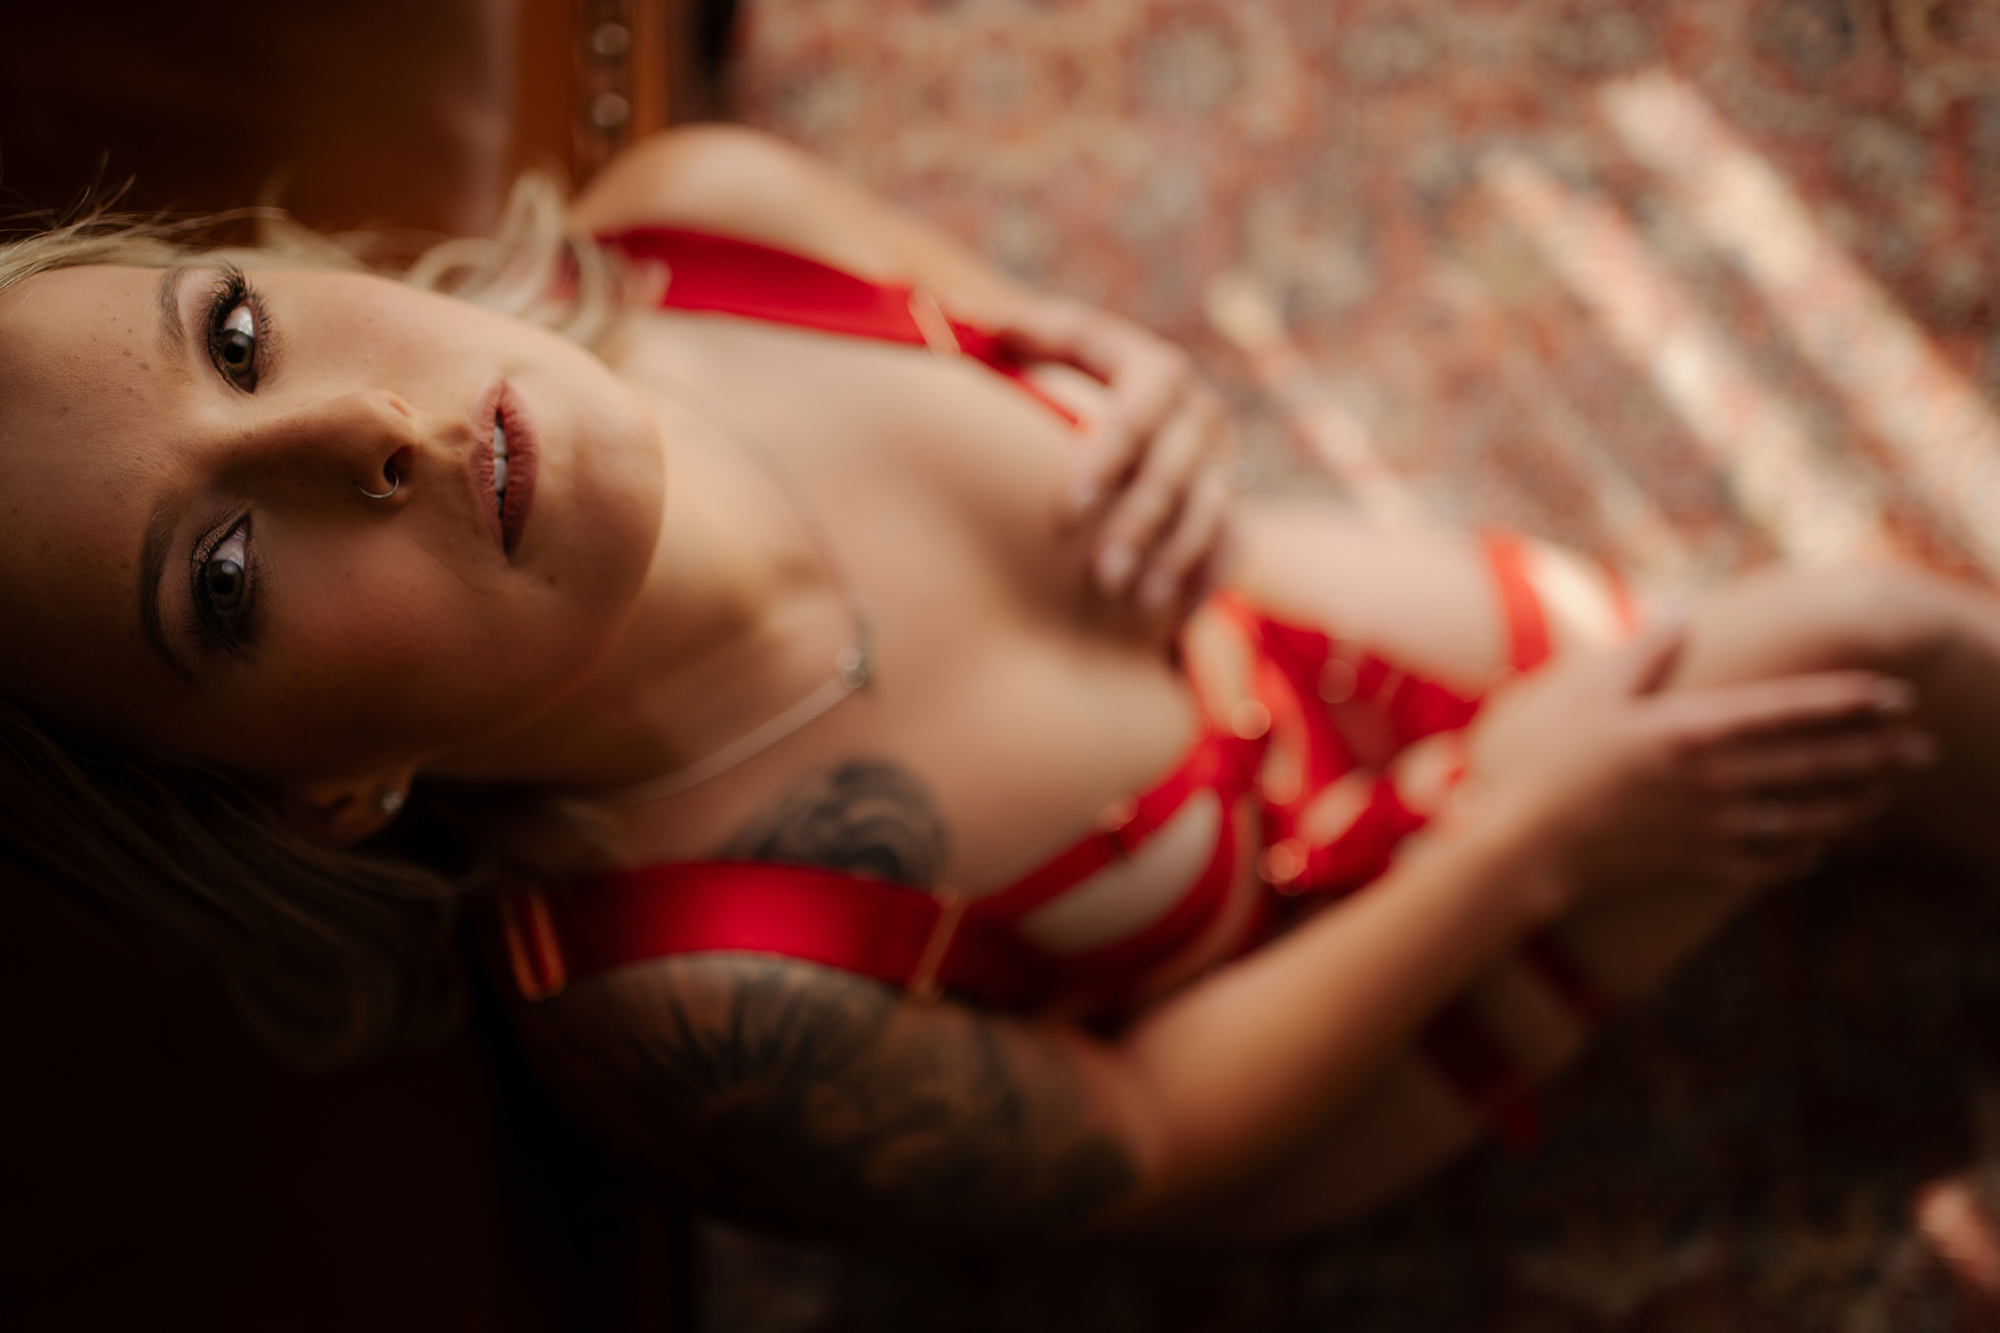 Blond woman in red strappy lingerie poses for boudoir photo shoot